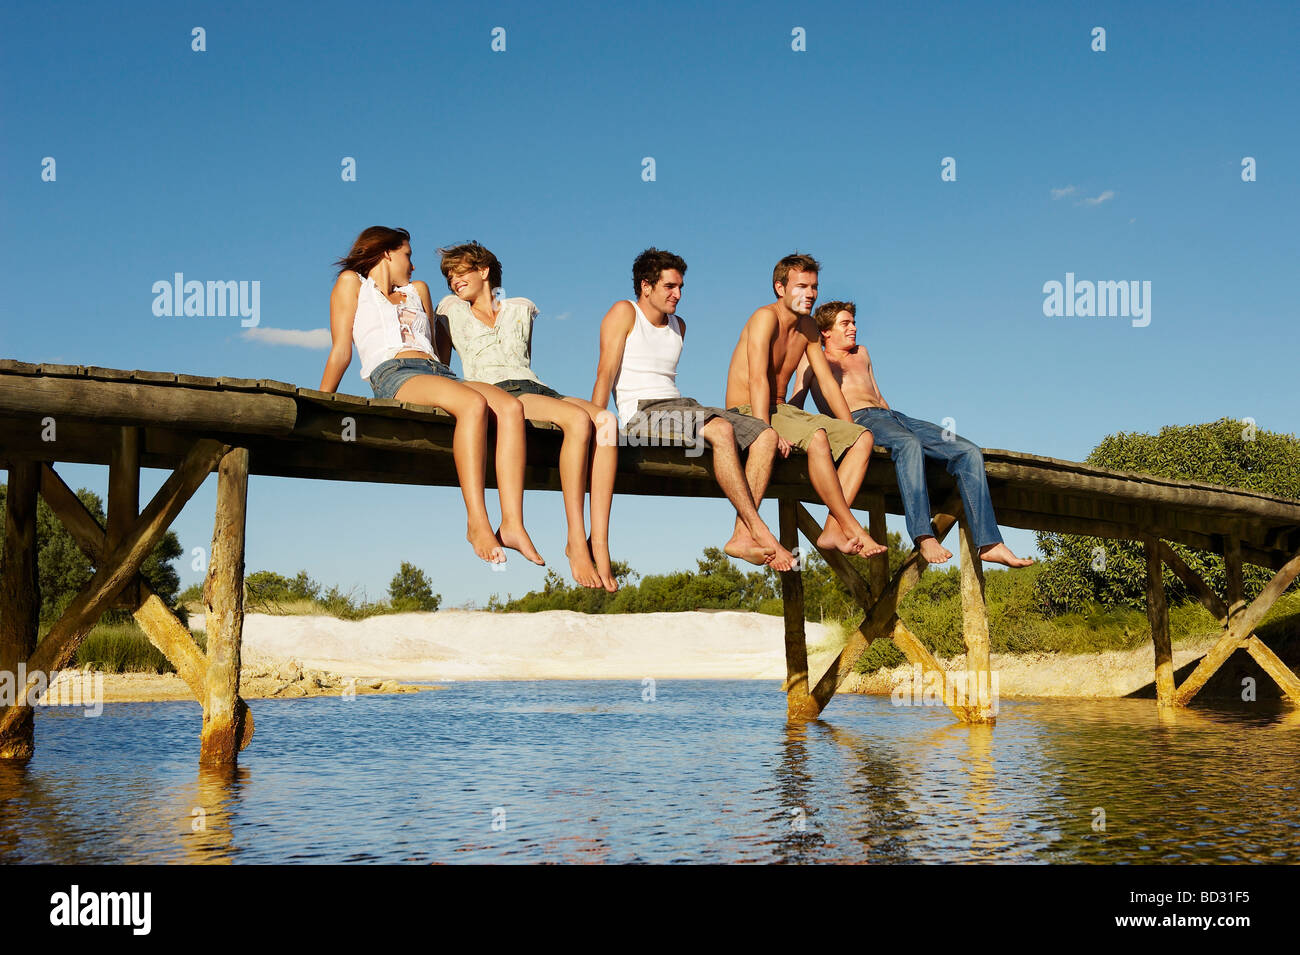 Group of young people sitting on jetty Stock Photo